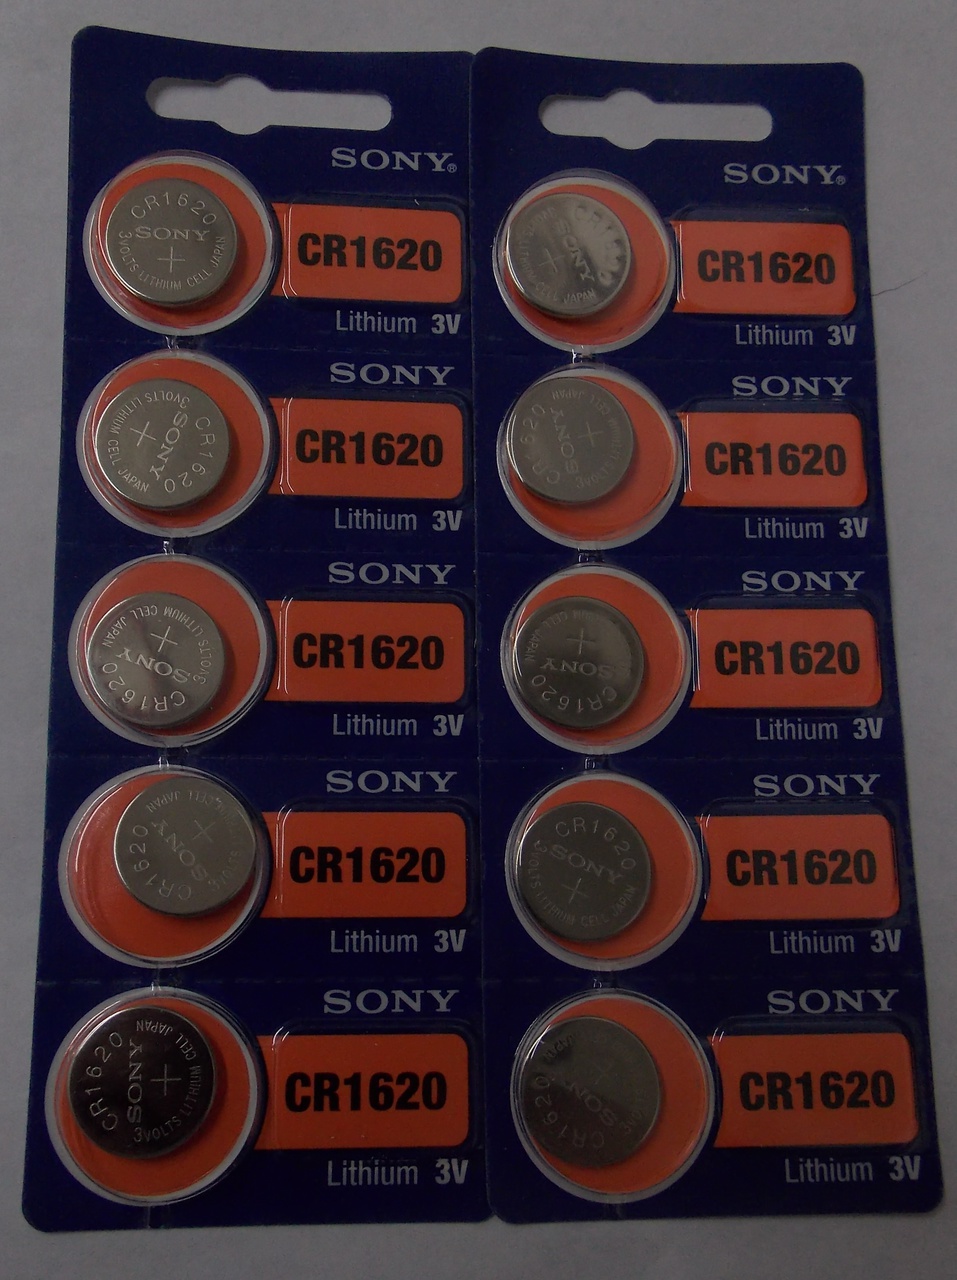 Sony CR1620 3V Lithium Coin Battery - 10 Pack + FREE SHIPPING!